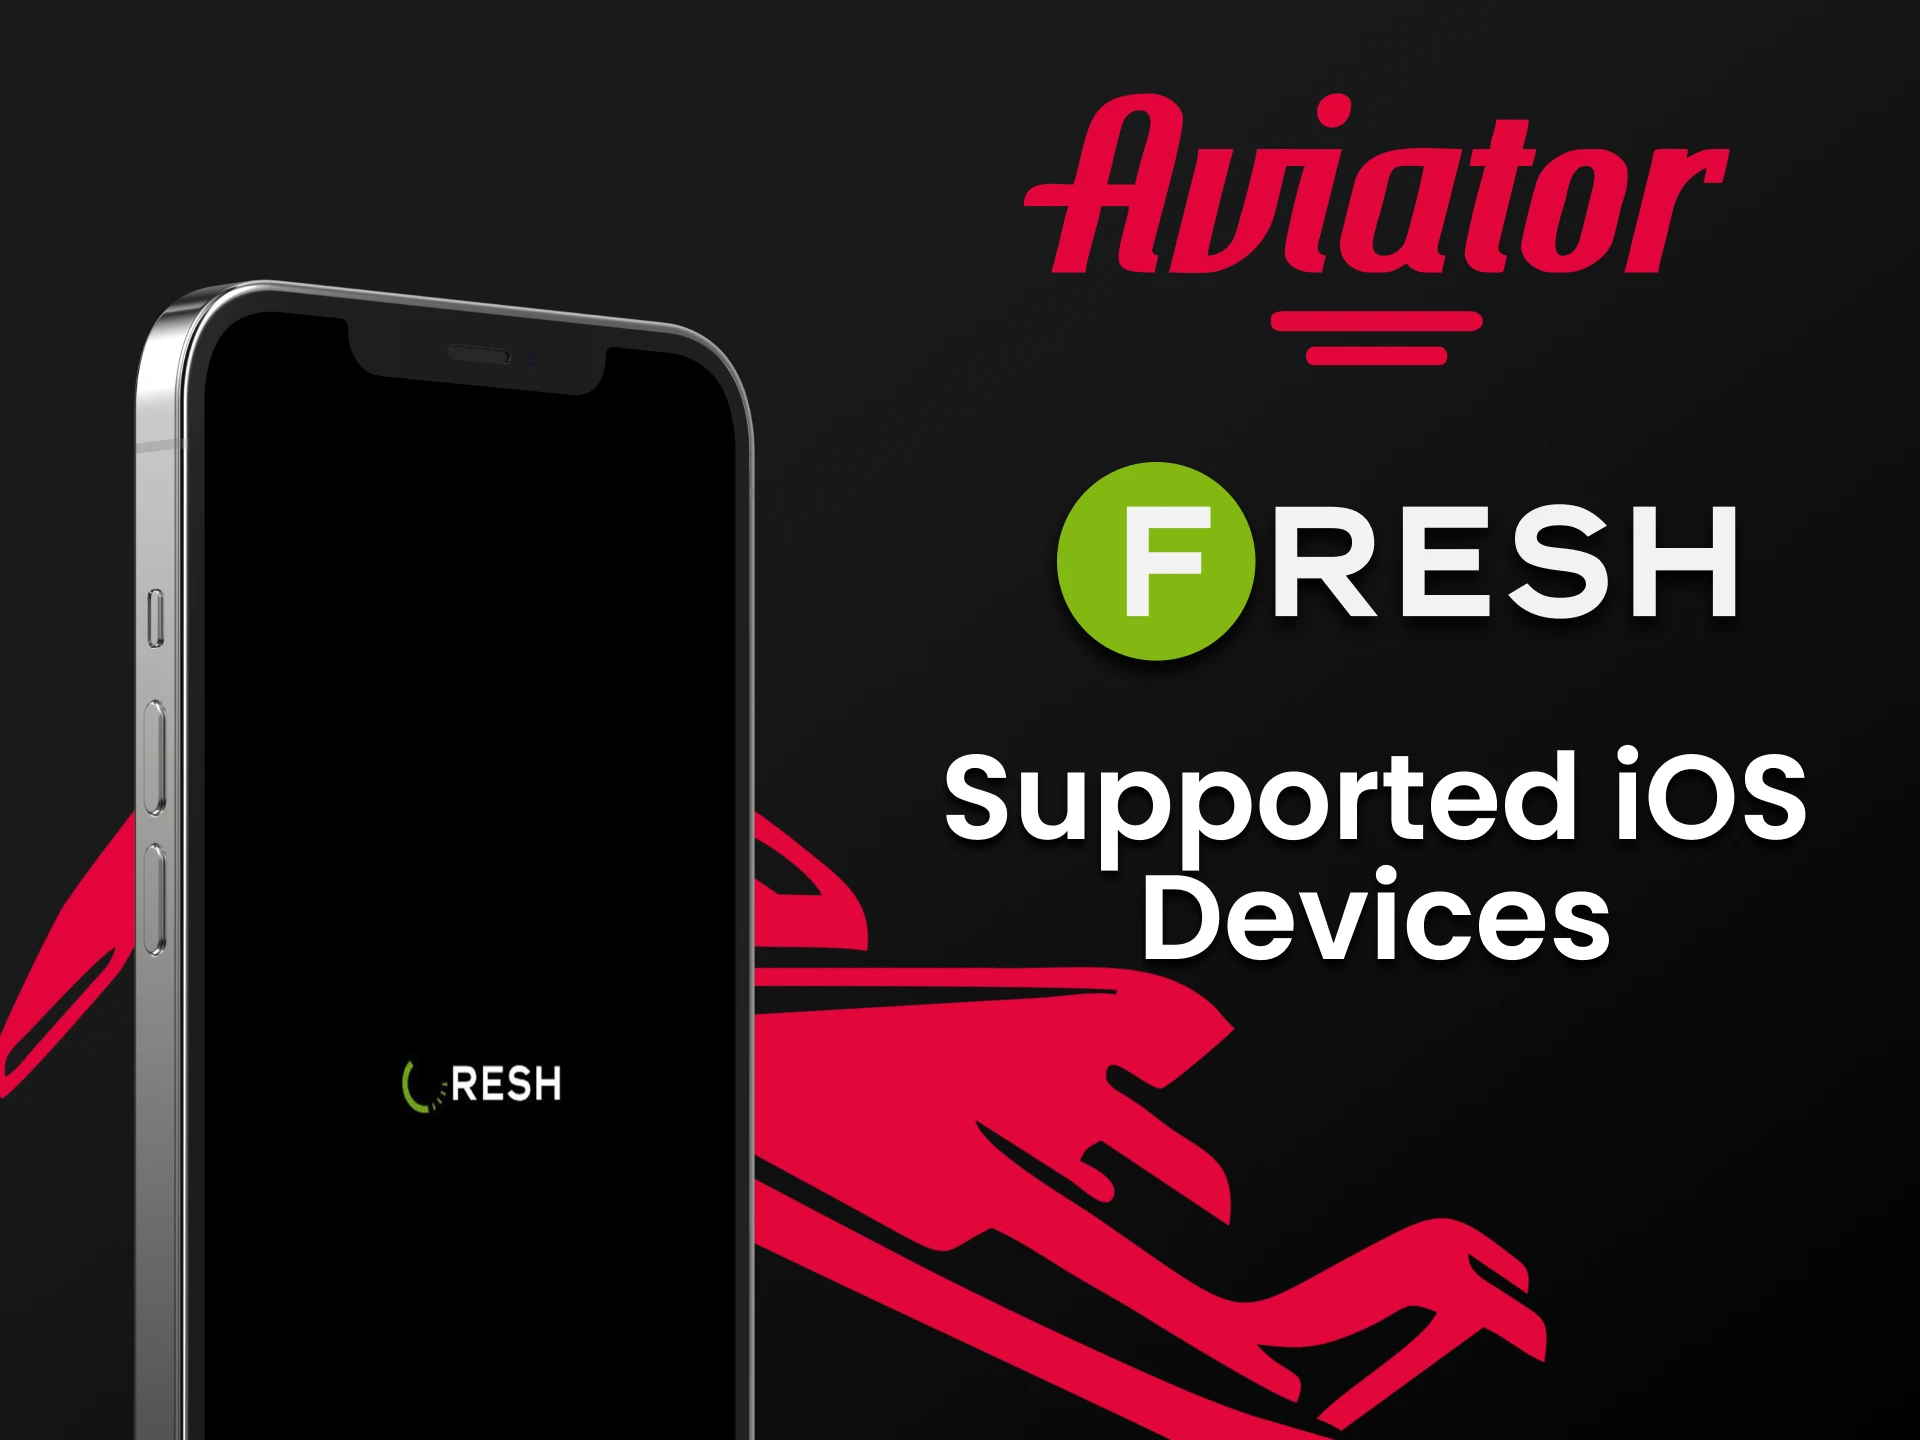 Choose iOS devices to play Aviator in the Fresh Casino app.